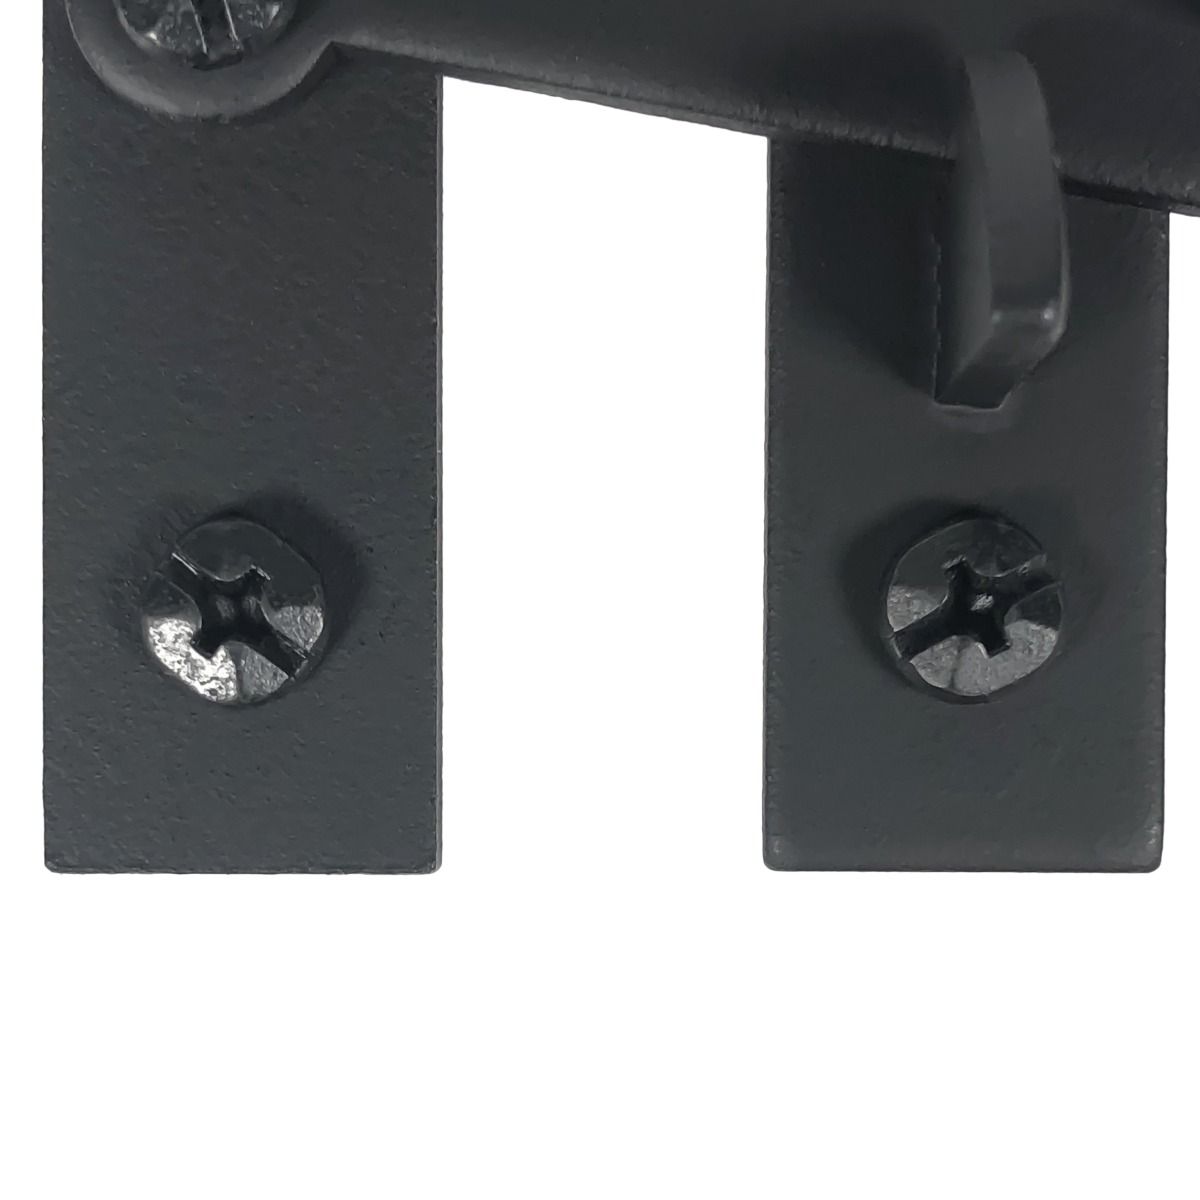 Pigtail Iron Cabinet Latch